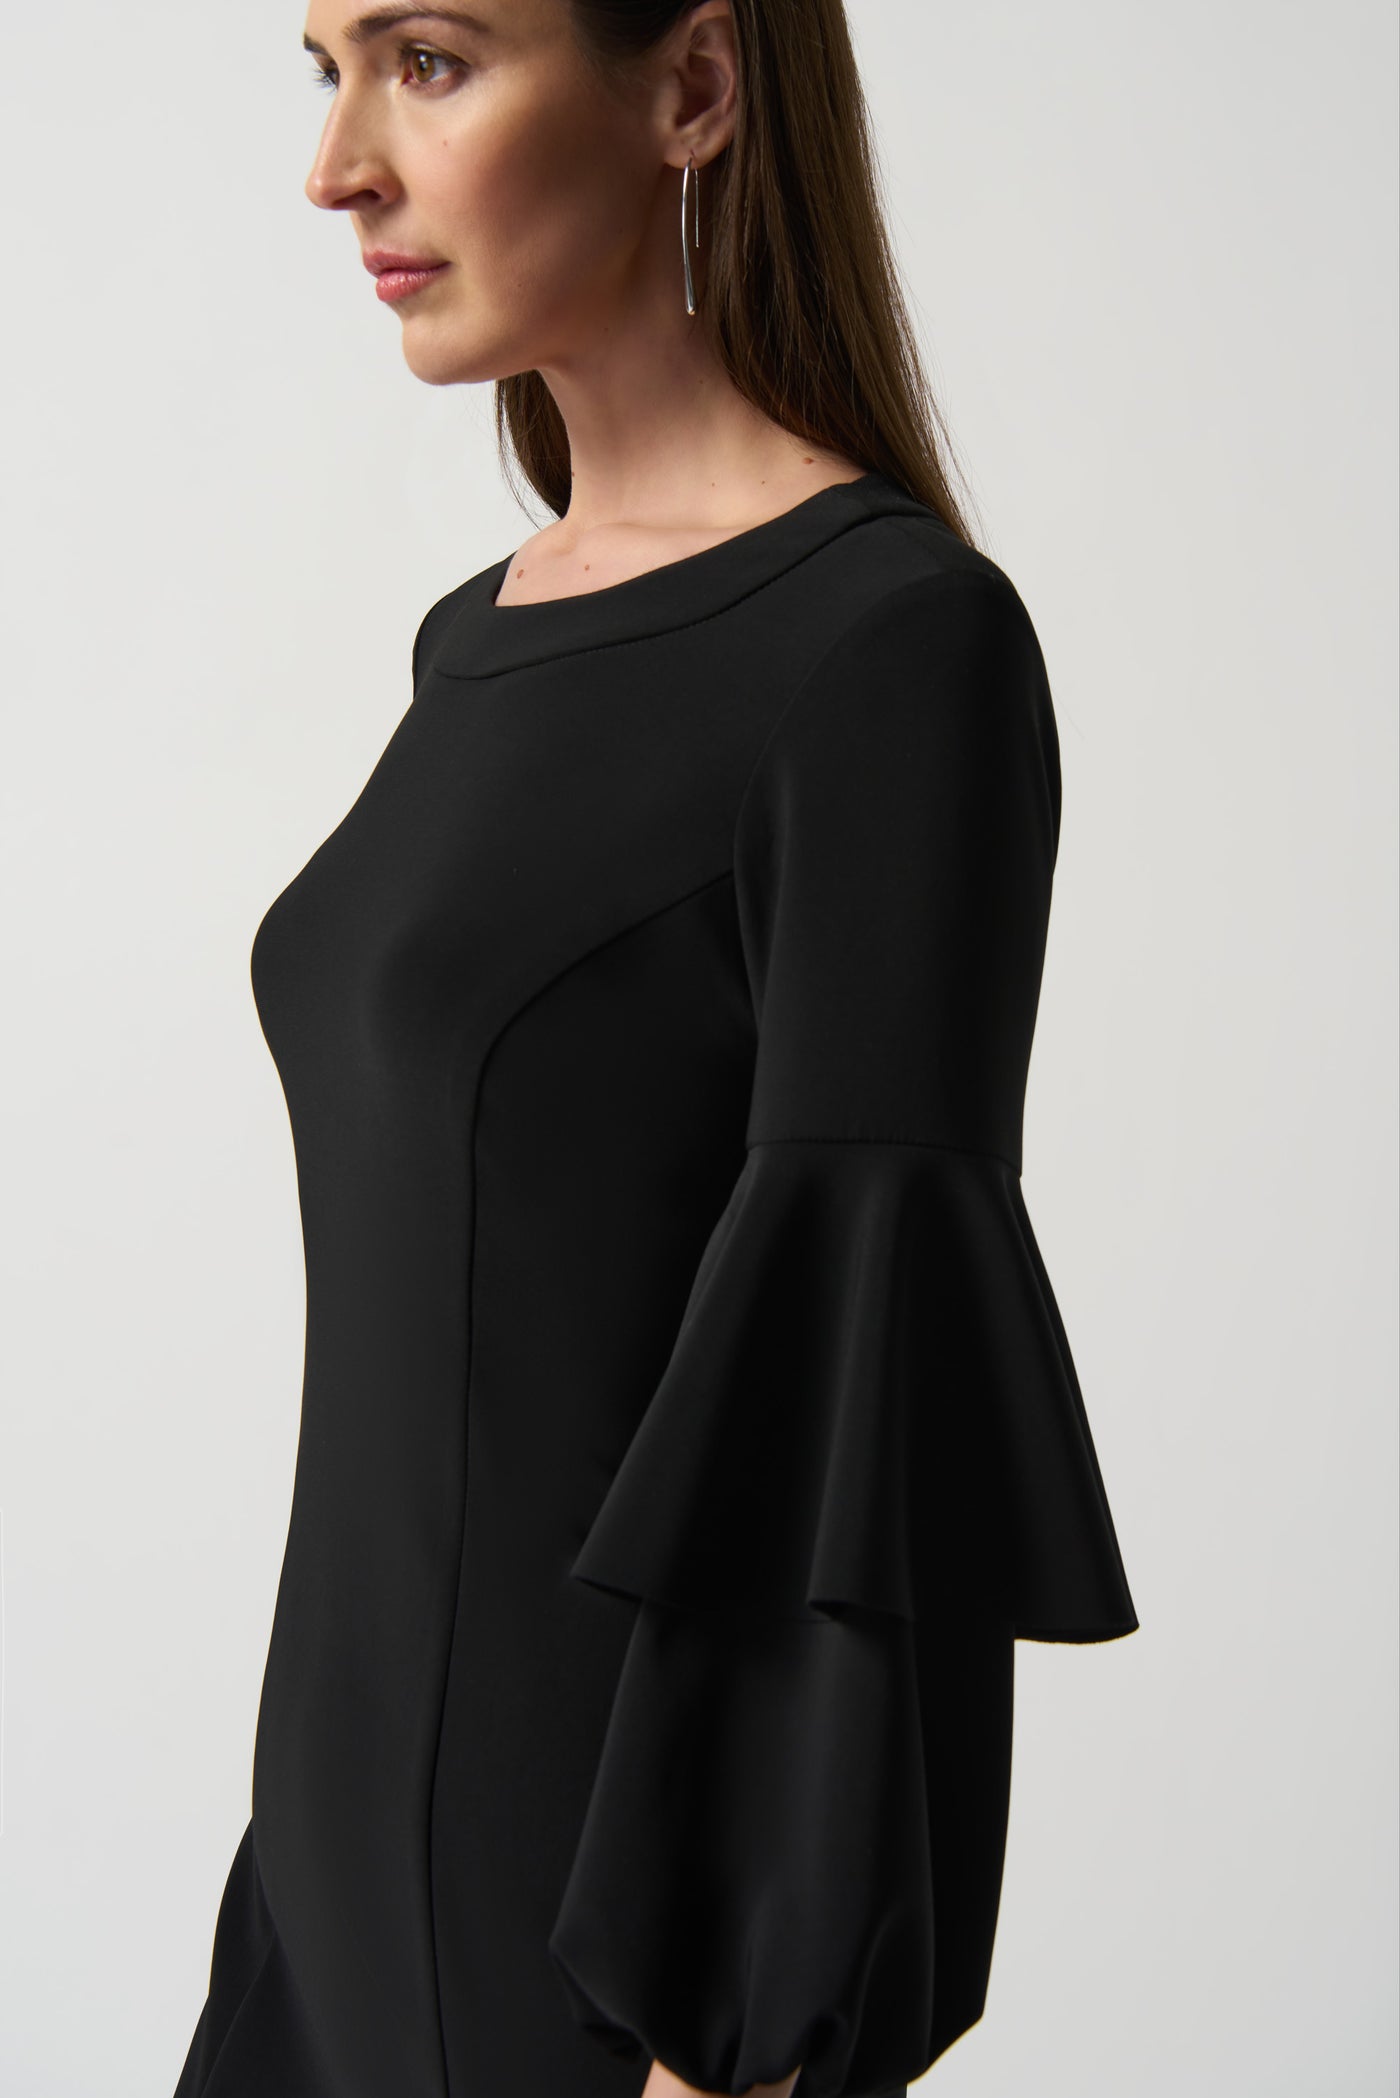 Stand Out Bell Sleeve Dress, Black